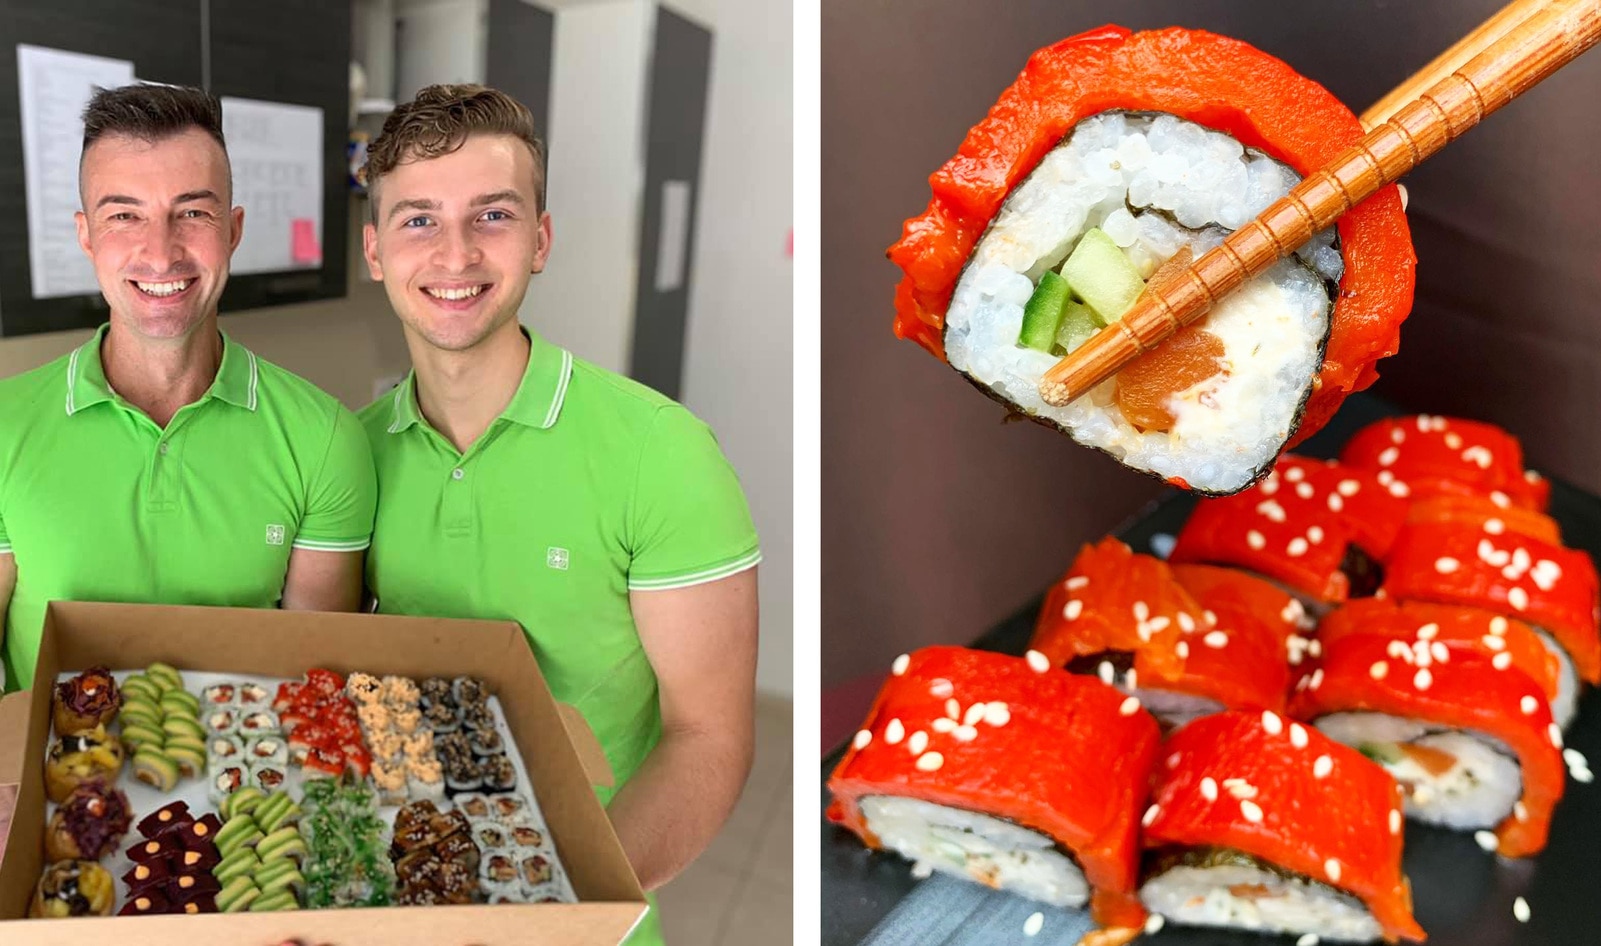 Malta Gets its First Vegan Sushi Takeout Restaurant